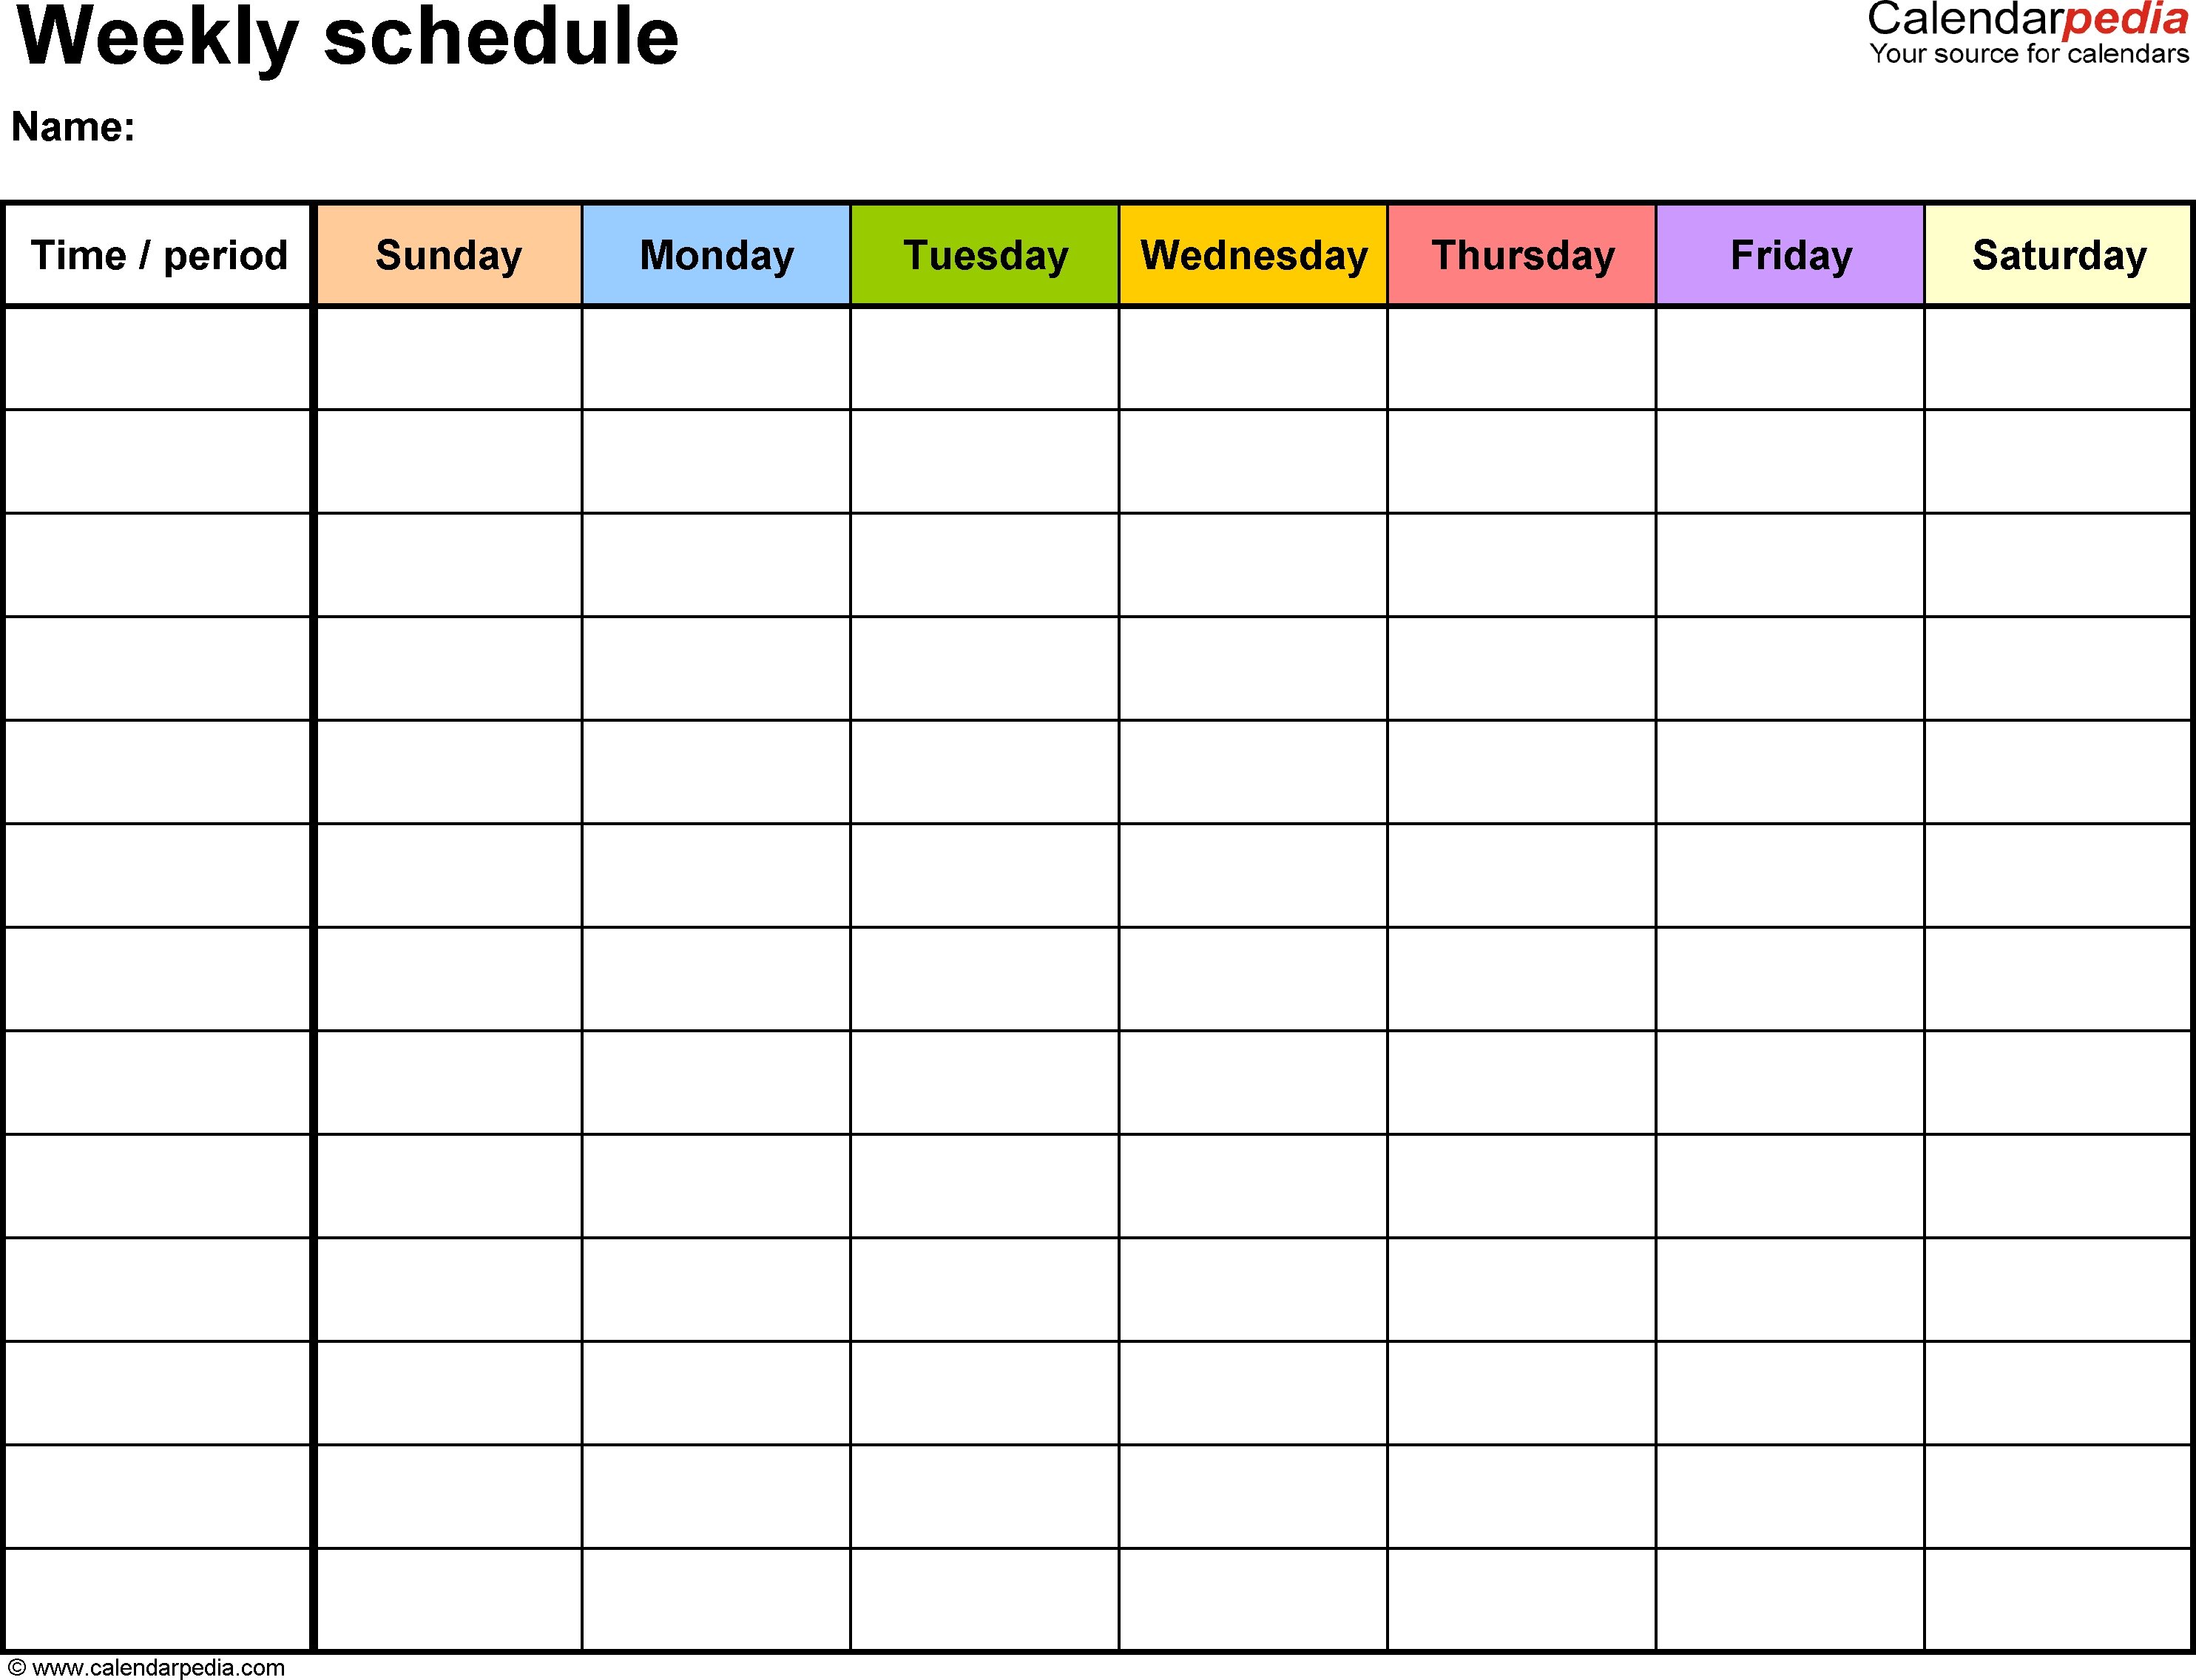 Free Weekly Schedule Templates For Word - 18 Templates  6 Week Blank Calendar Template